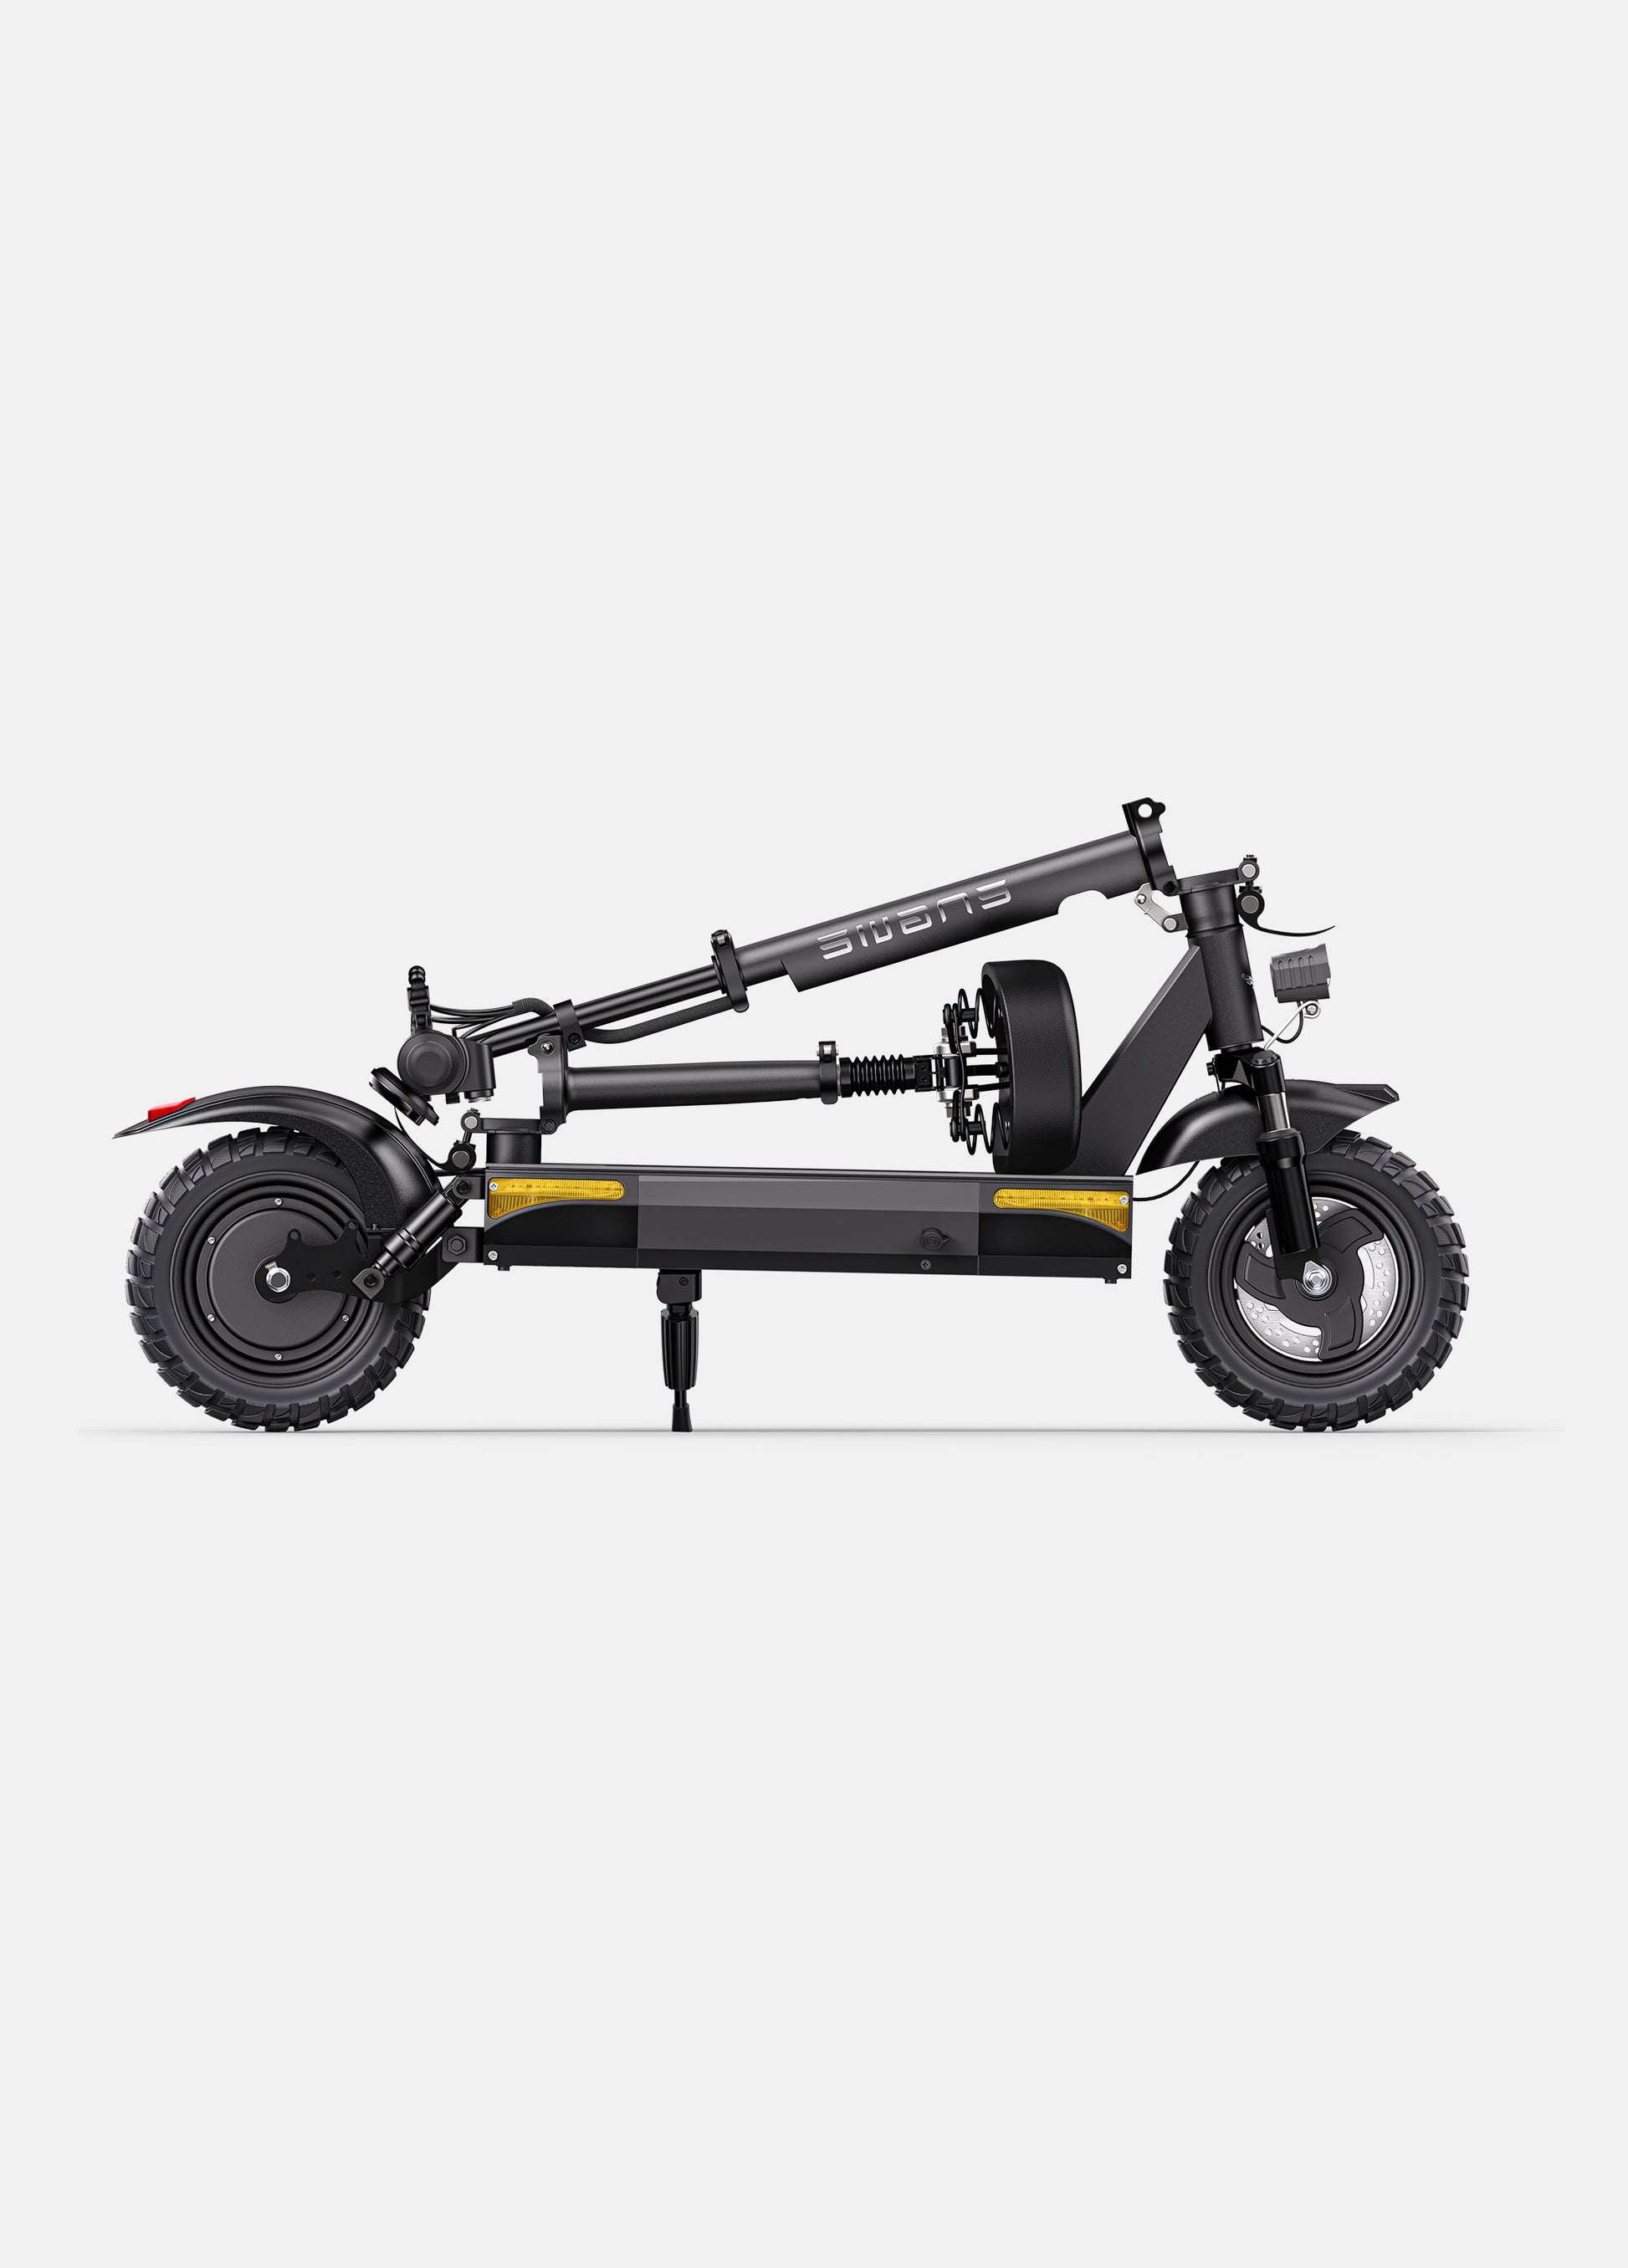 Folded Engwe S6 electric scooter, highlighting its compact size for portability.